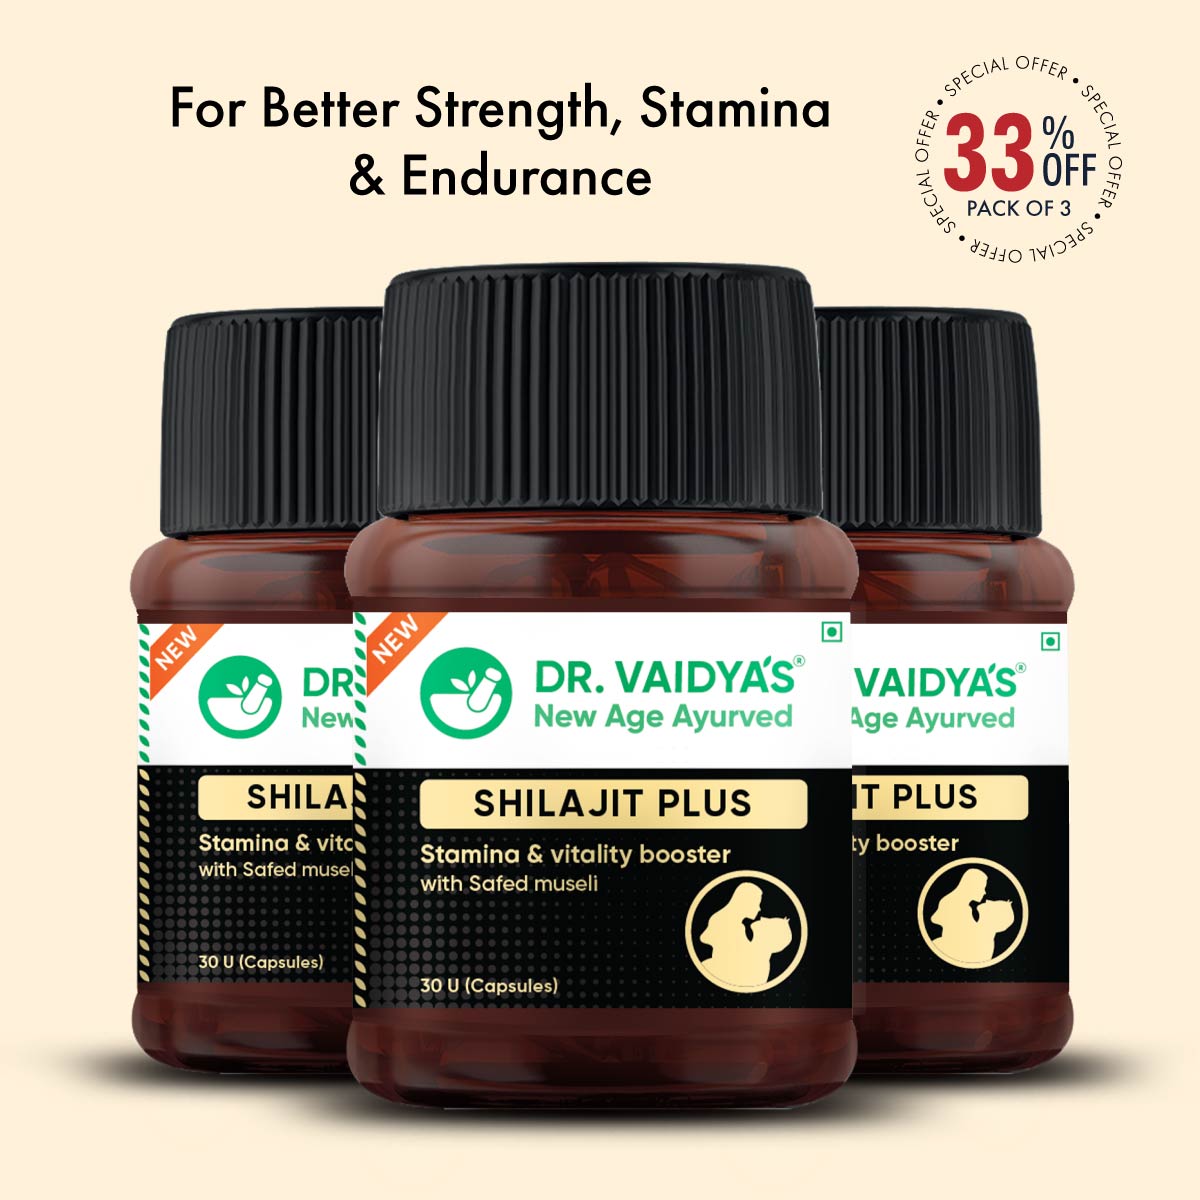 Shilajit Plus Capsules: More Strength & Stamina To Your Performance